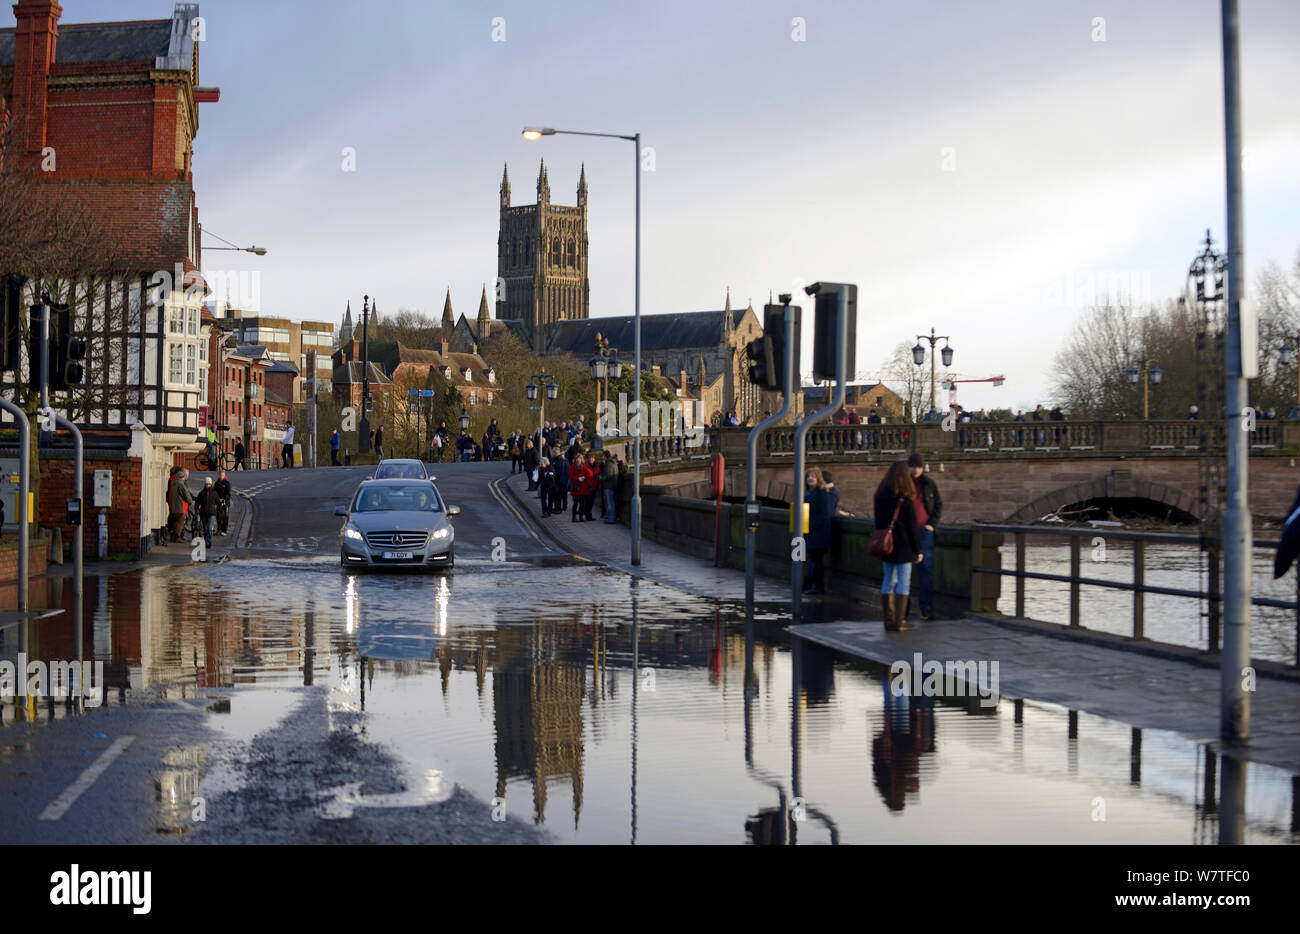 View of Worcester Cathedral with flooded road in the foreground, Worcester, England, UK, February 2014. Stock Photo